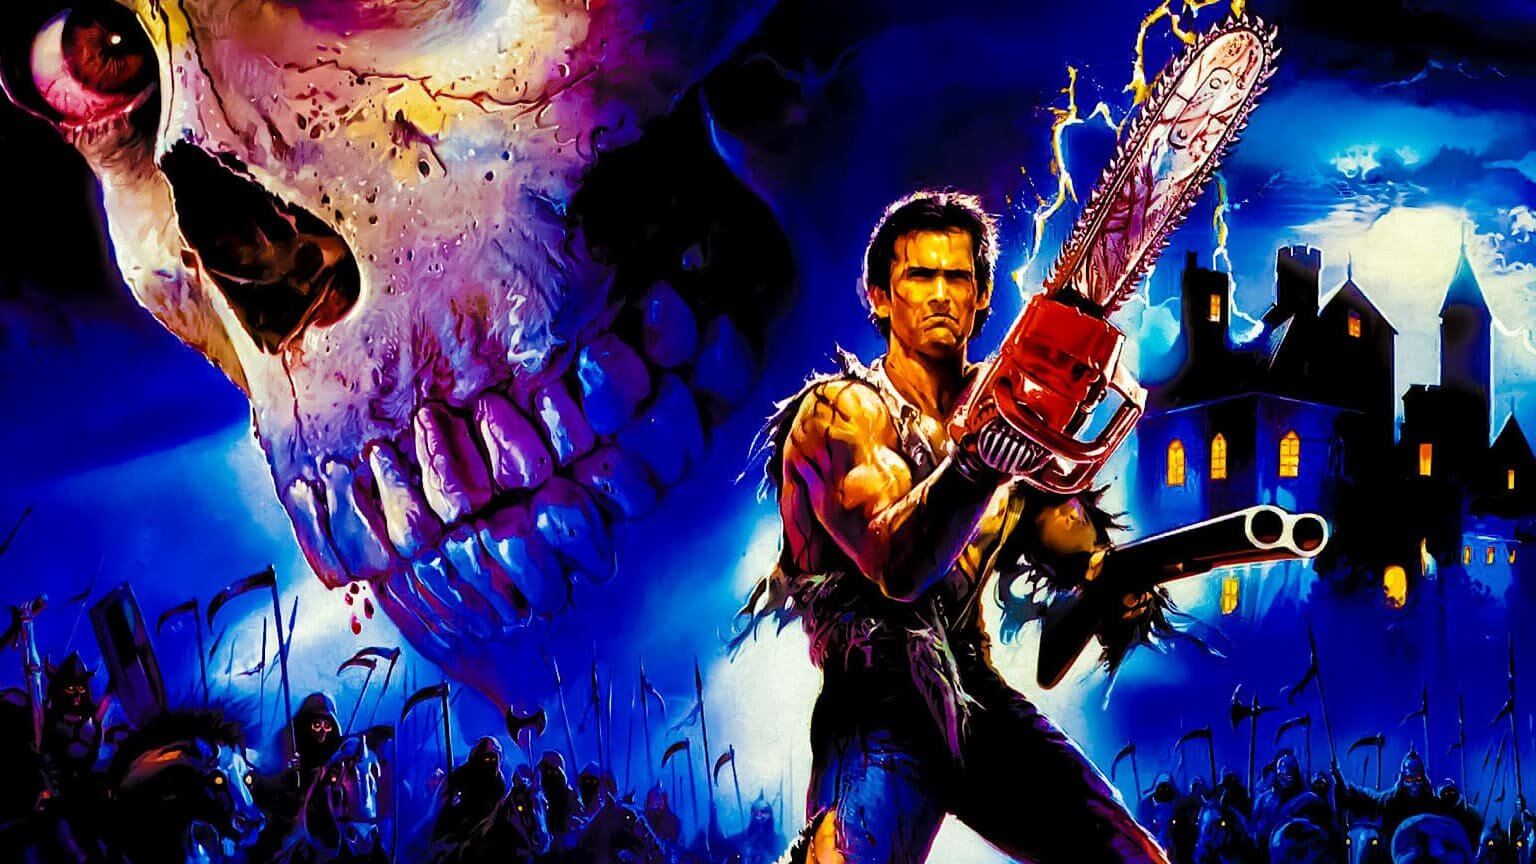 Army of Darkness 4K 1992 THEATRICAL big poster